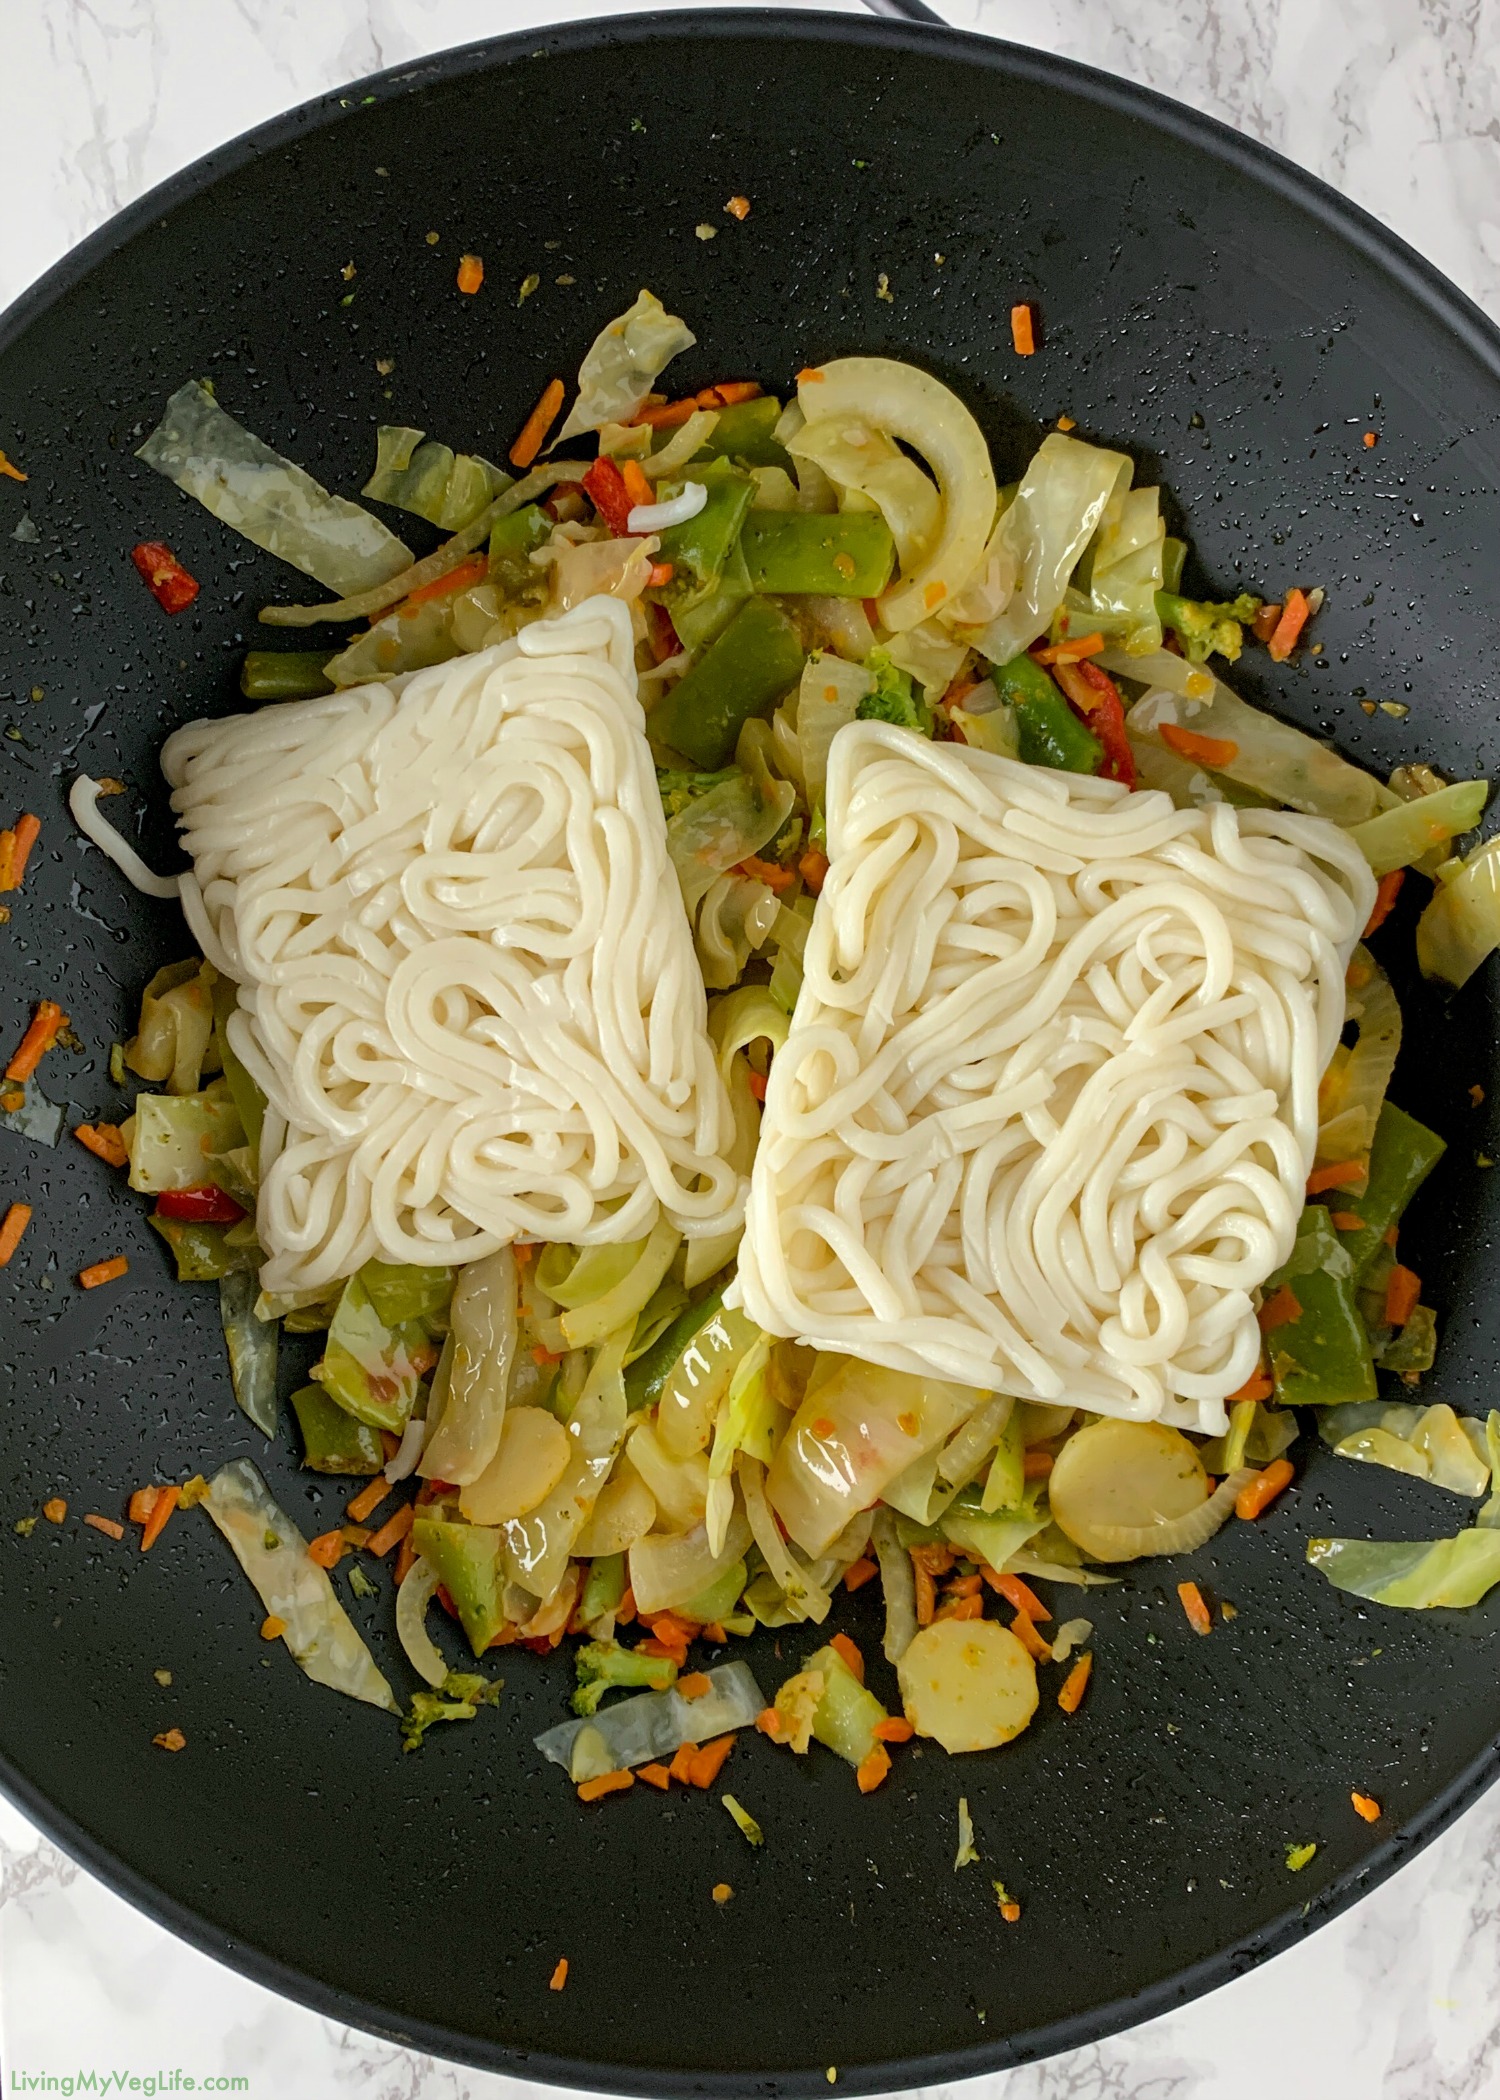 wok stir fry vegetables and cabbage and noodles with udon noodles added